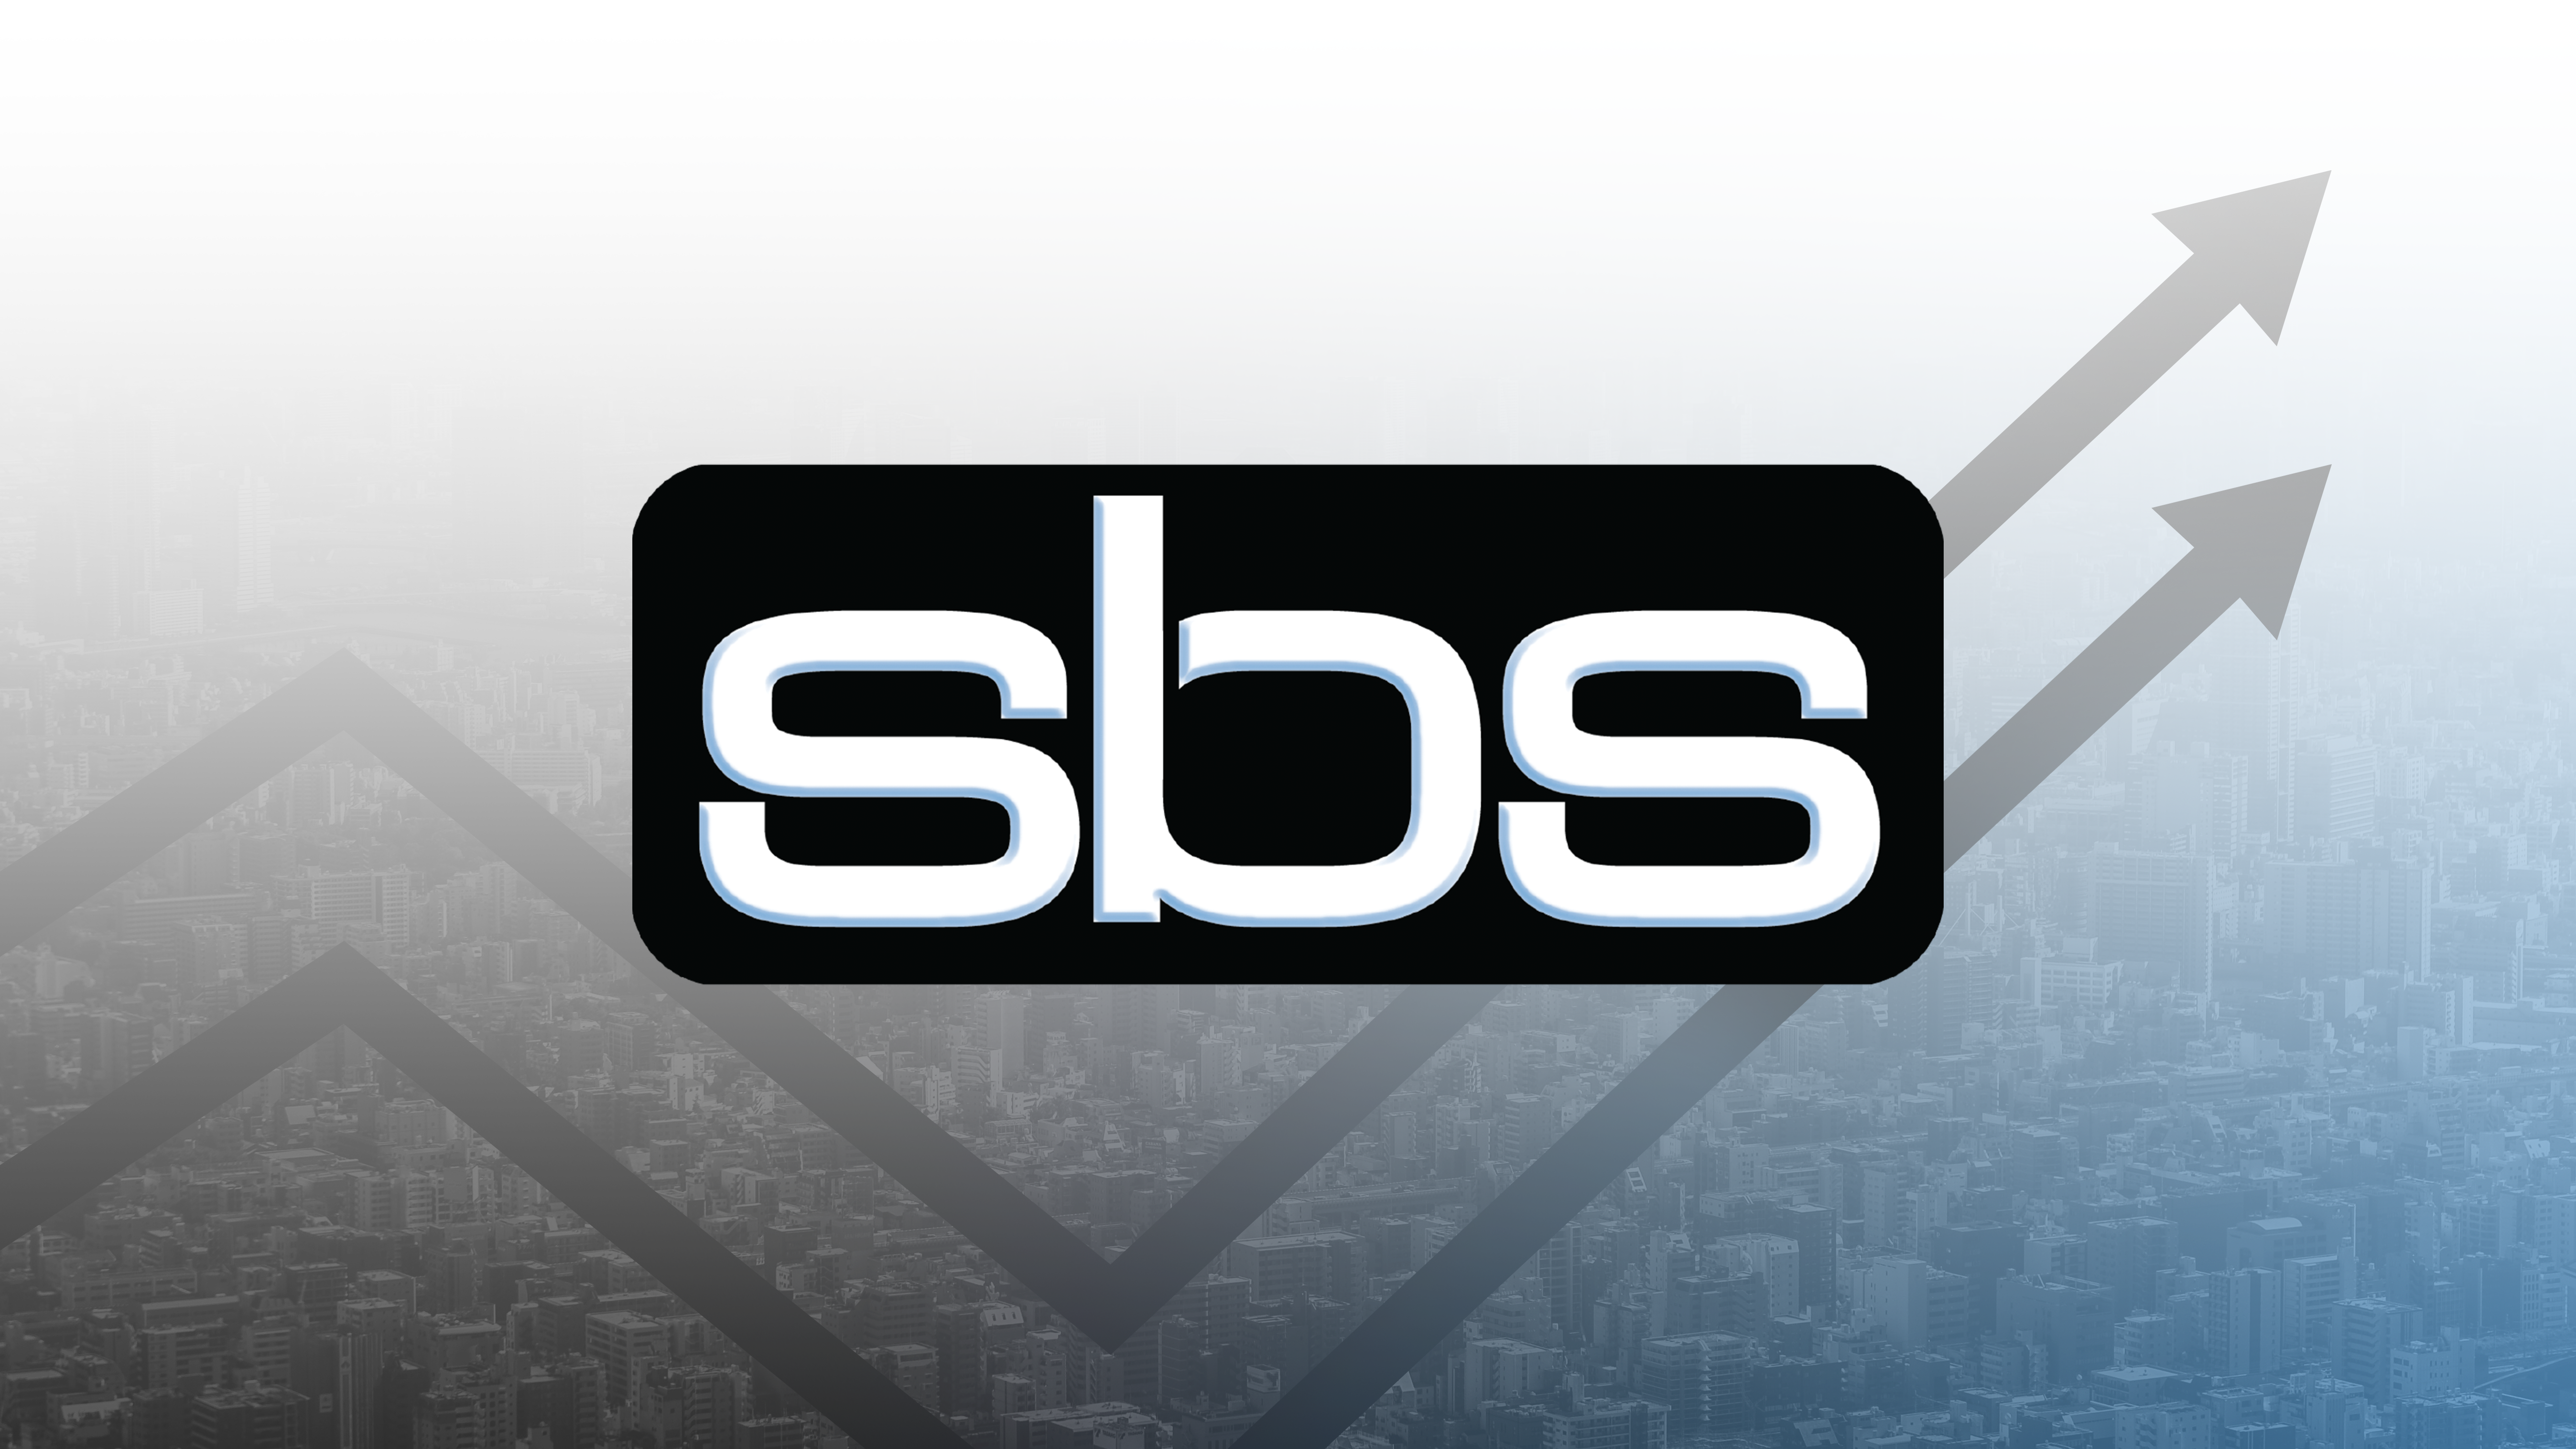 SBS logo on background of arrows showing growth